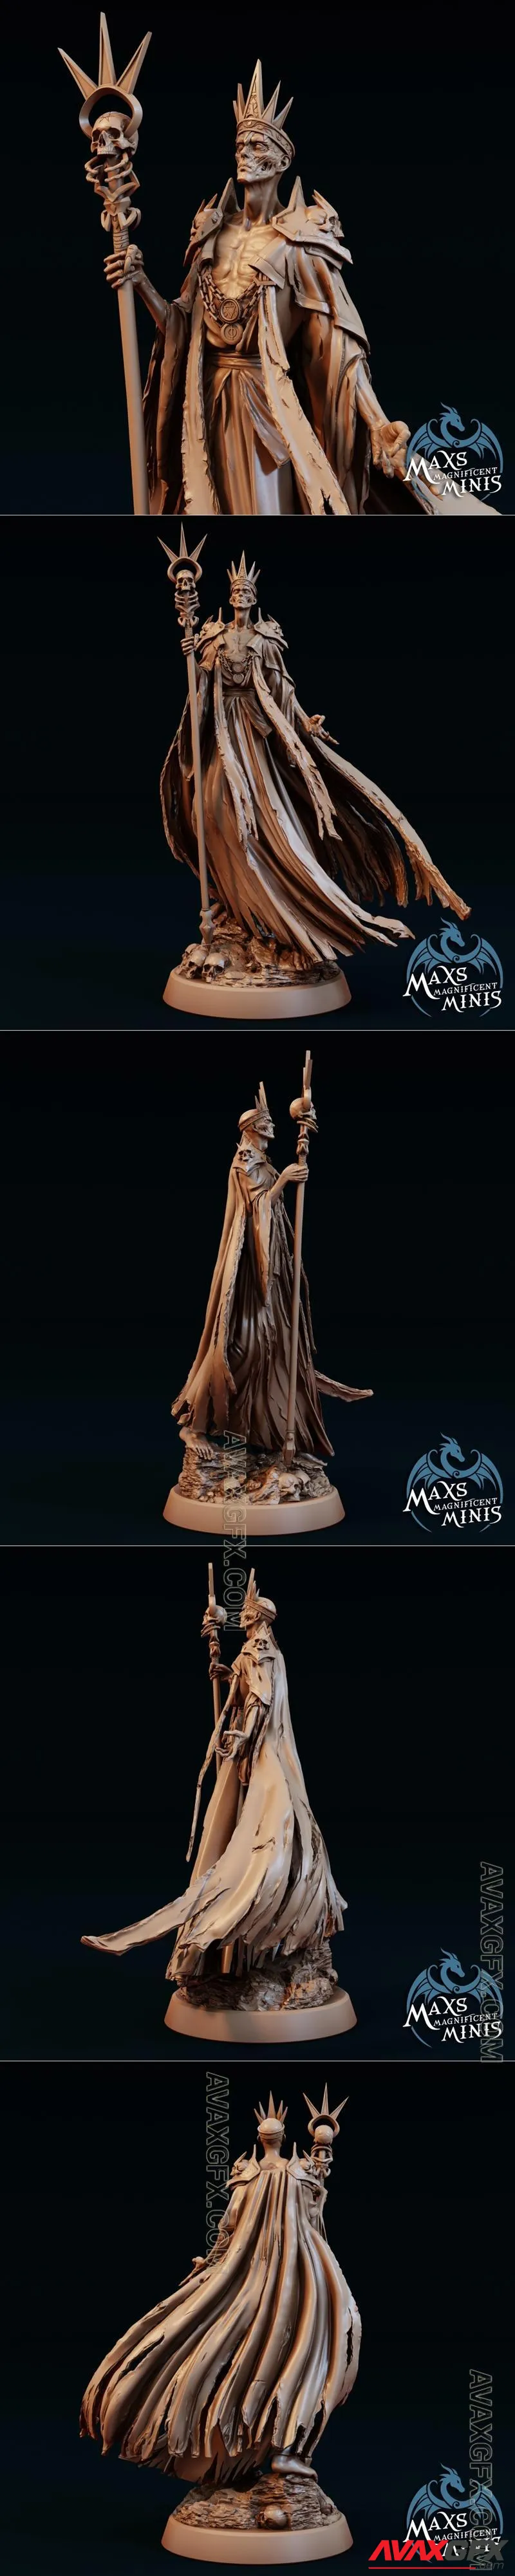 Anderoth, the Deathless King - Lich - STL 3D Model